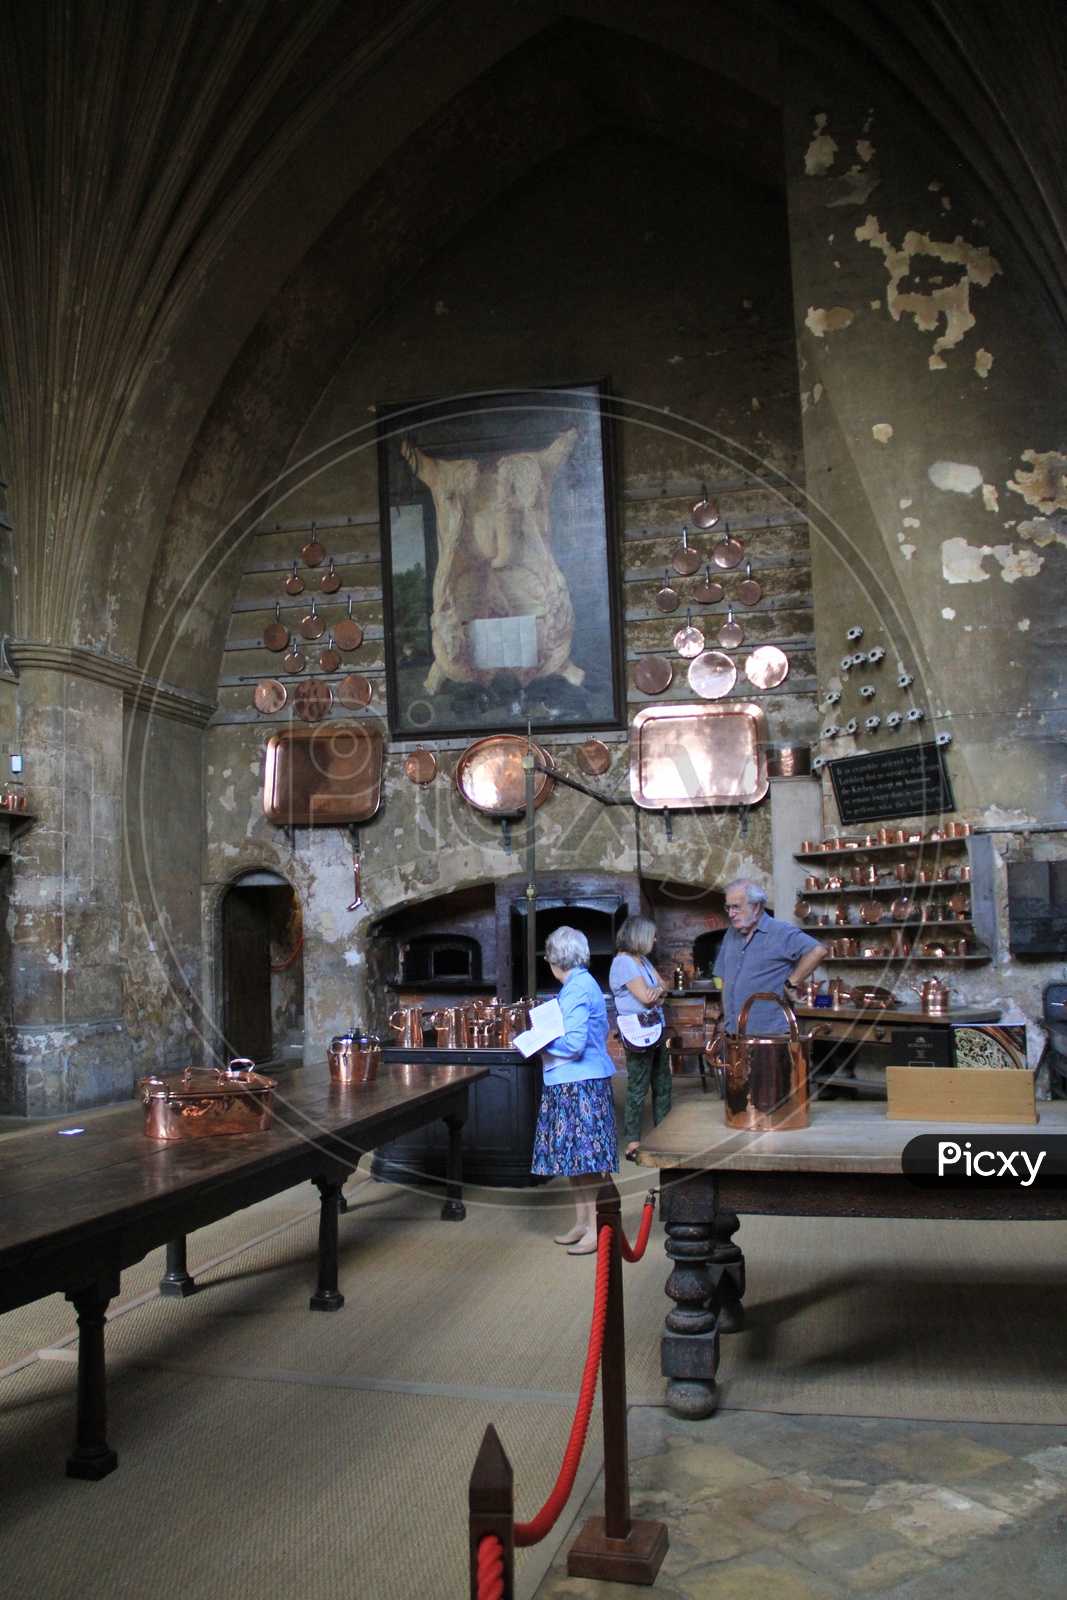 Tourists at Burghley House checking Copper Utensils in Kitchen